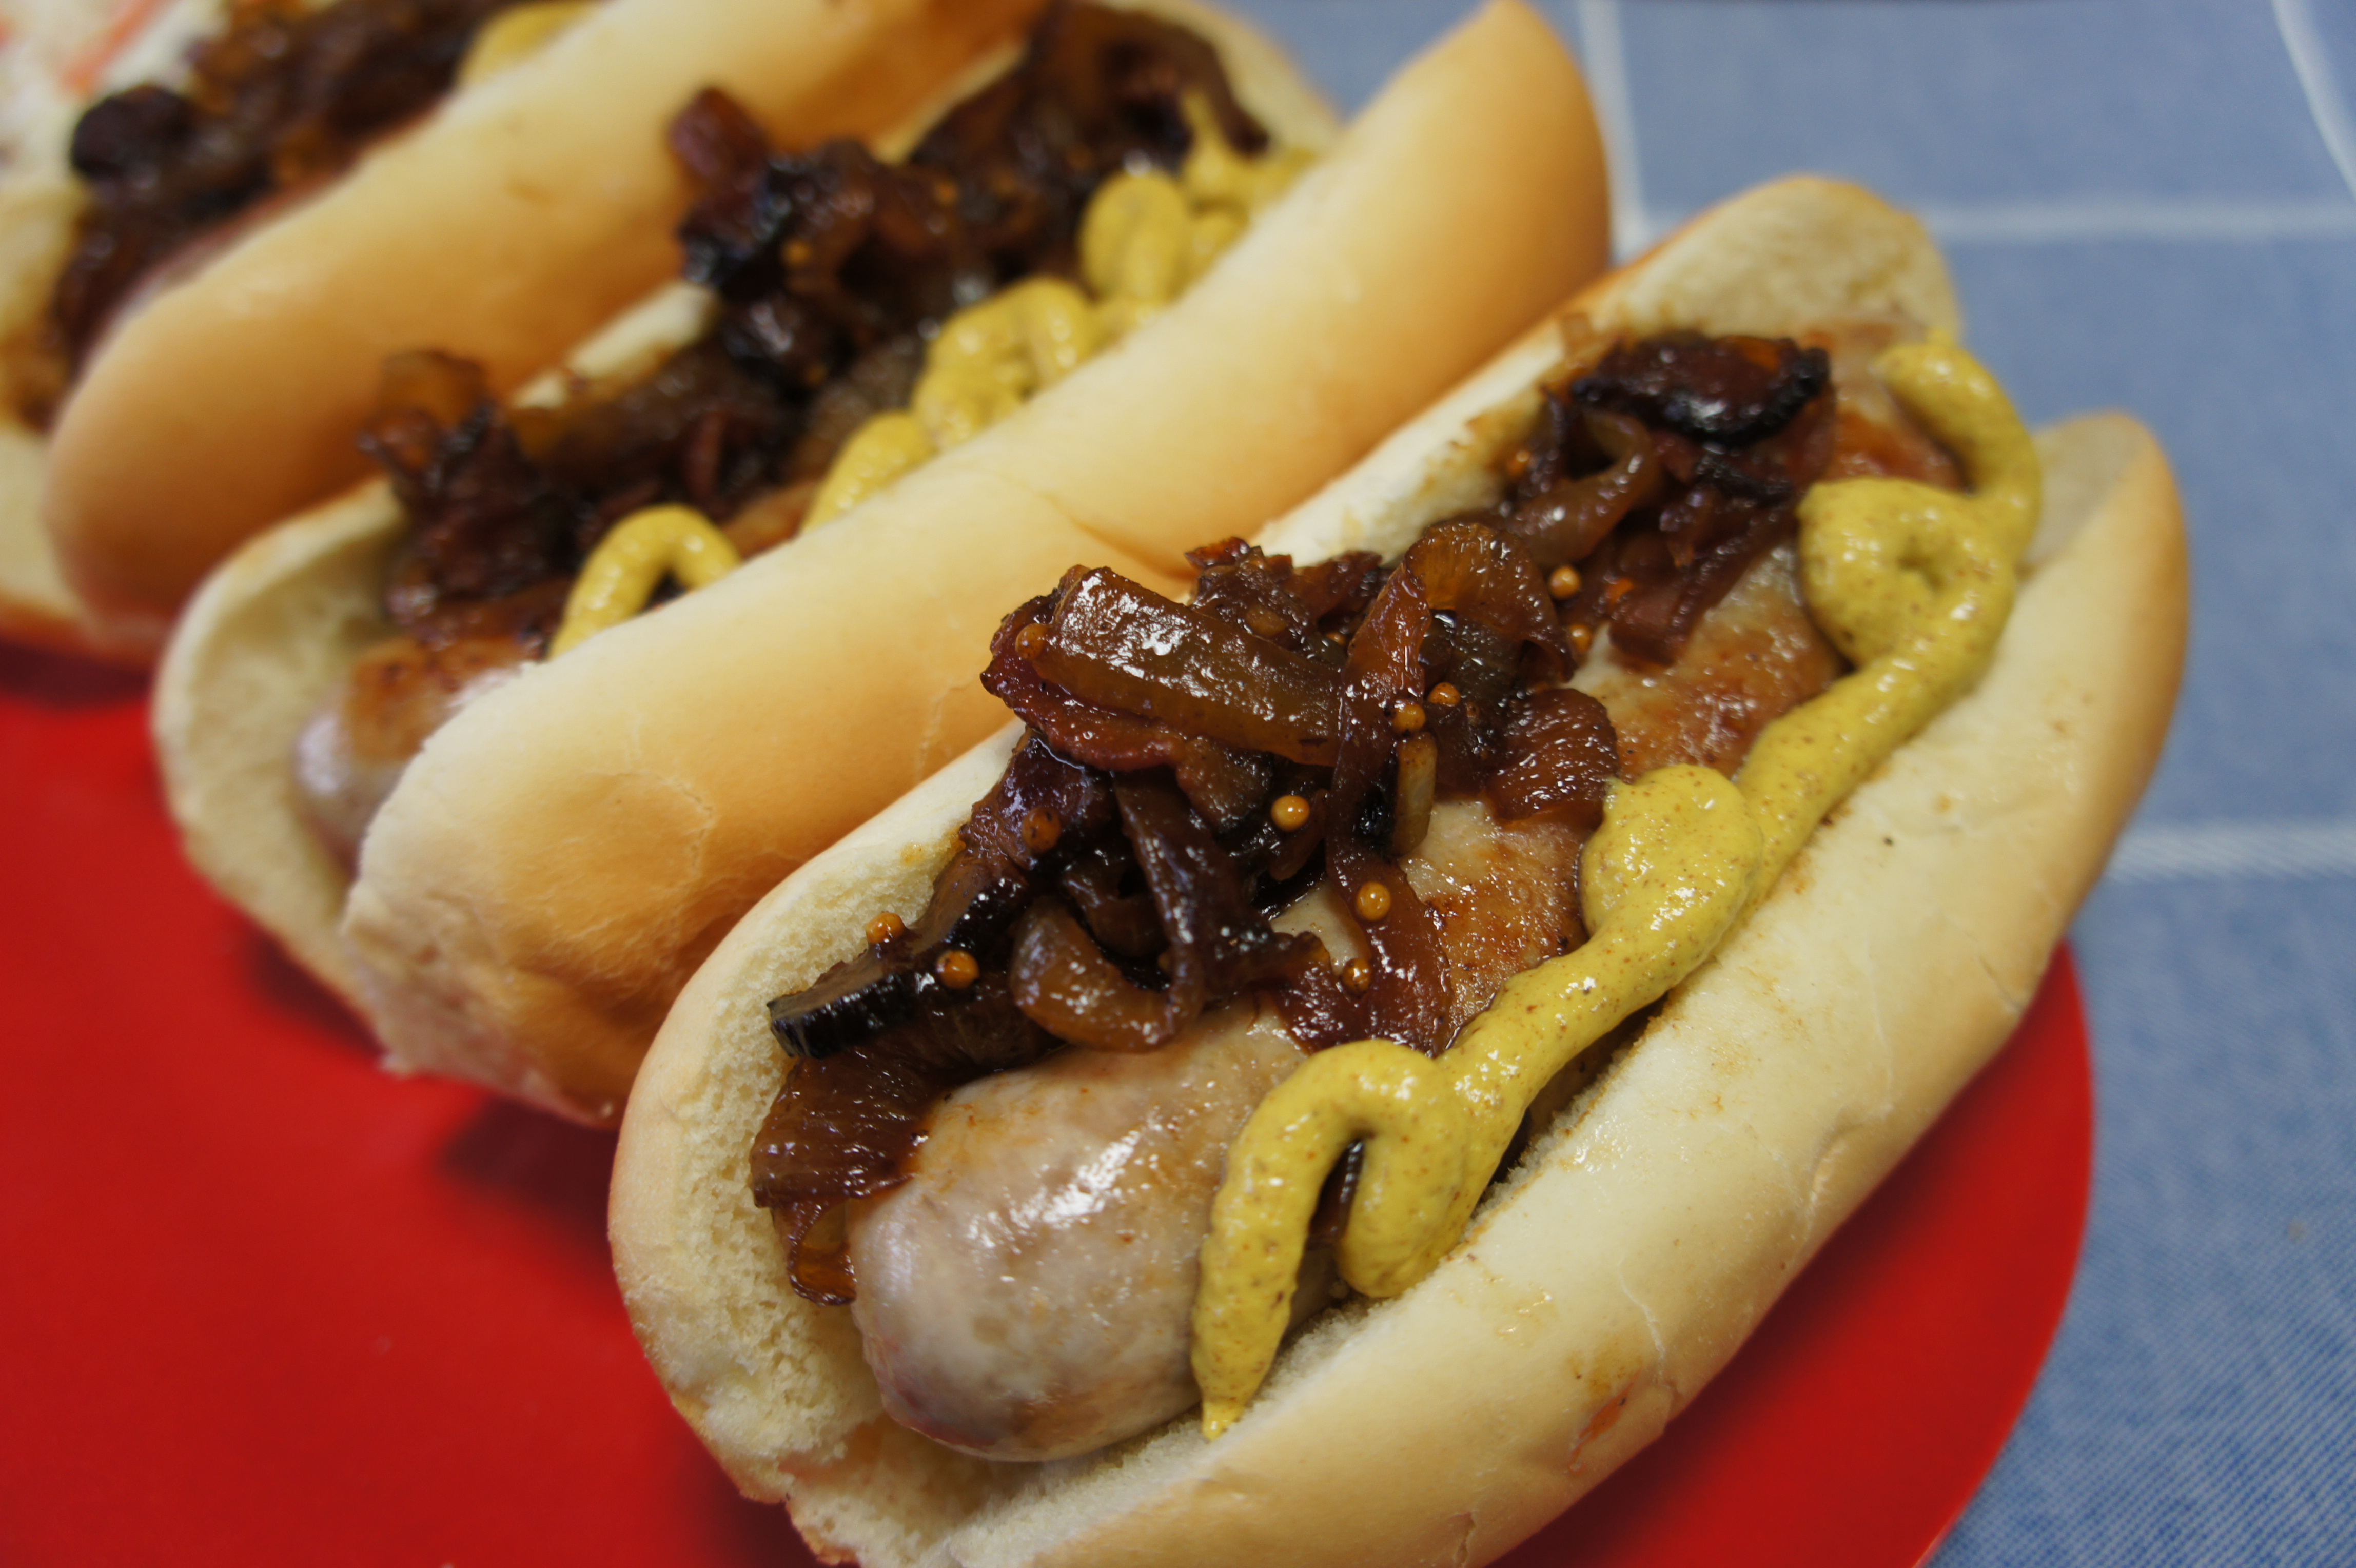 Top these Brats with the Bacon Onion Chutney and your favorite mustard and enjoy!